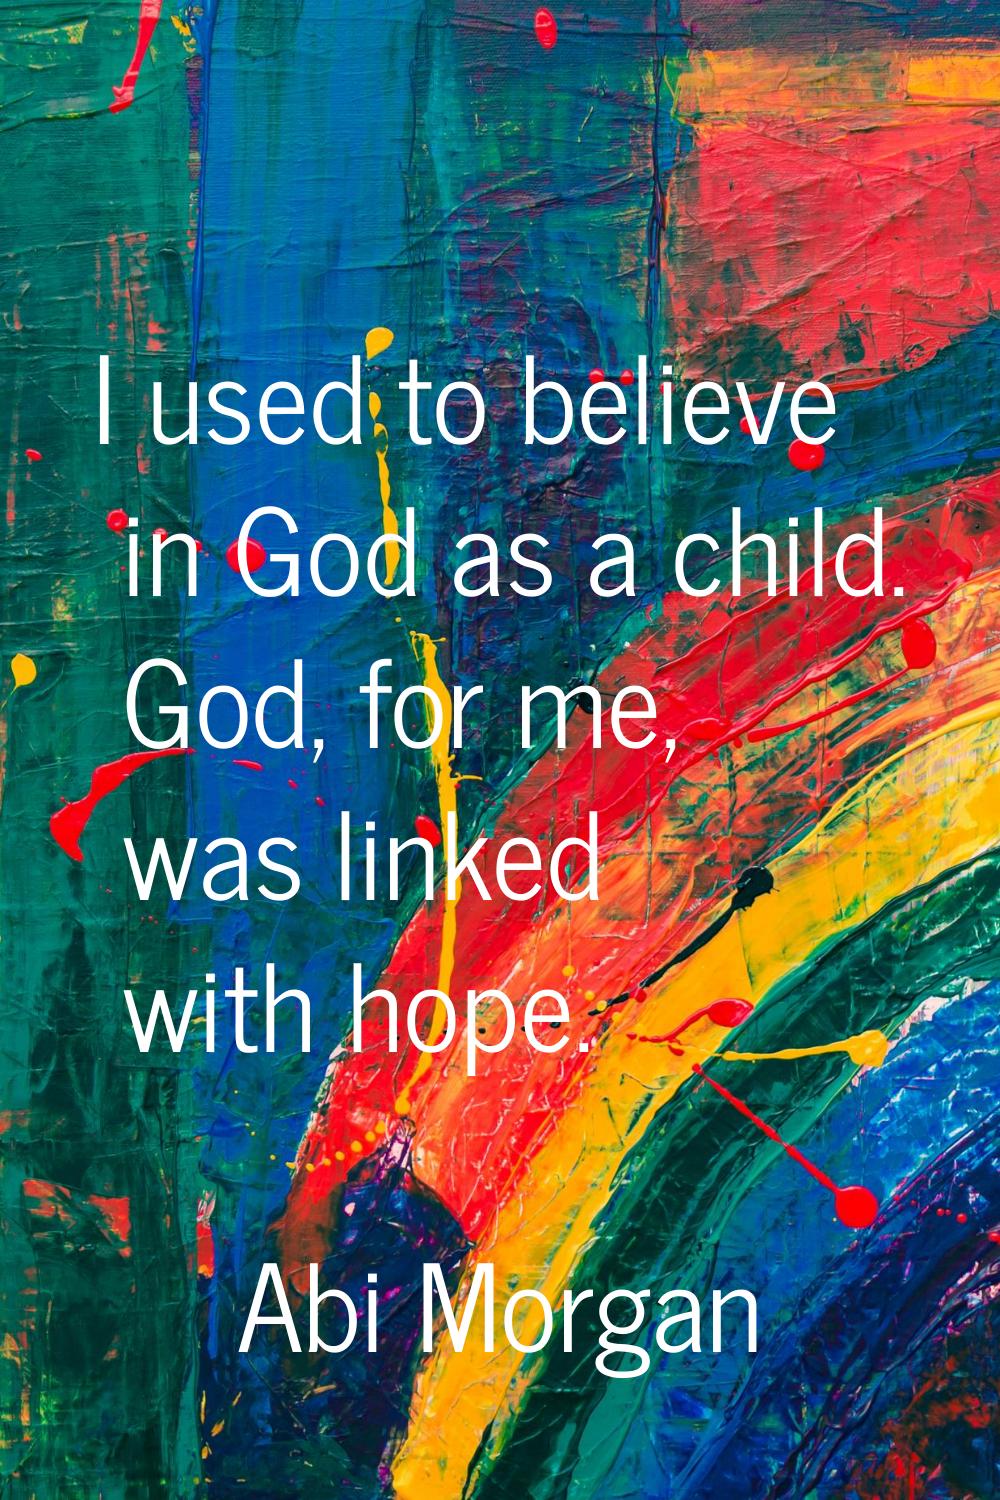 I used to believe in God as a child. God, for me, was linked with hope.